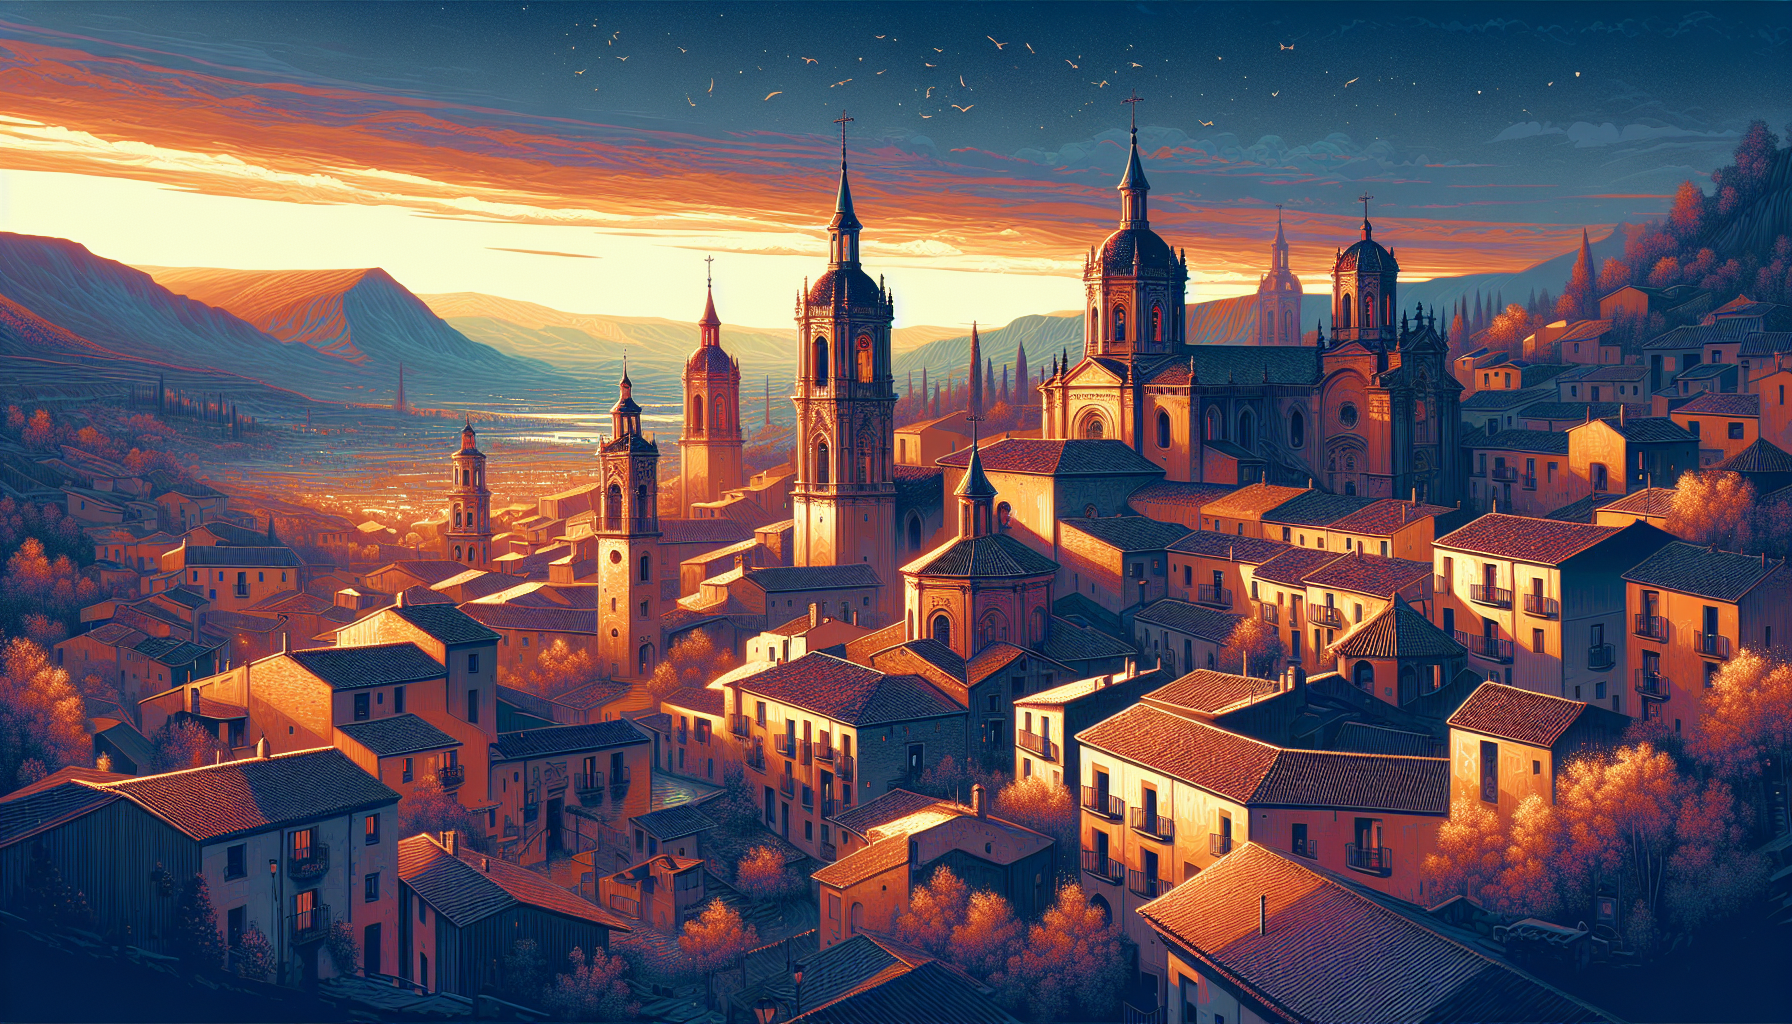 Panoramic view of a quaint Spanish village dotted with various historical churches, showcasing different architectural styles from Gothic to Baroque under a sunset sky.